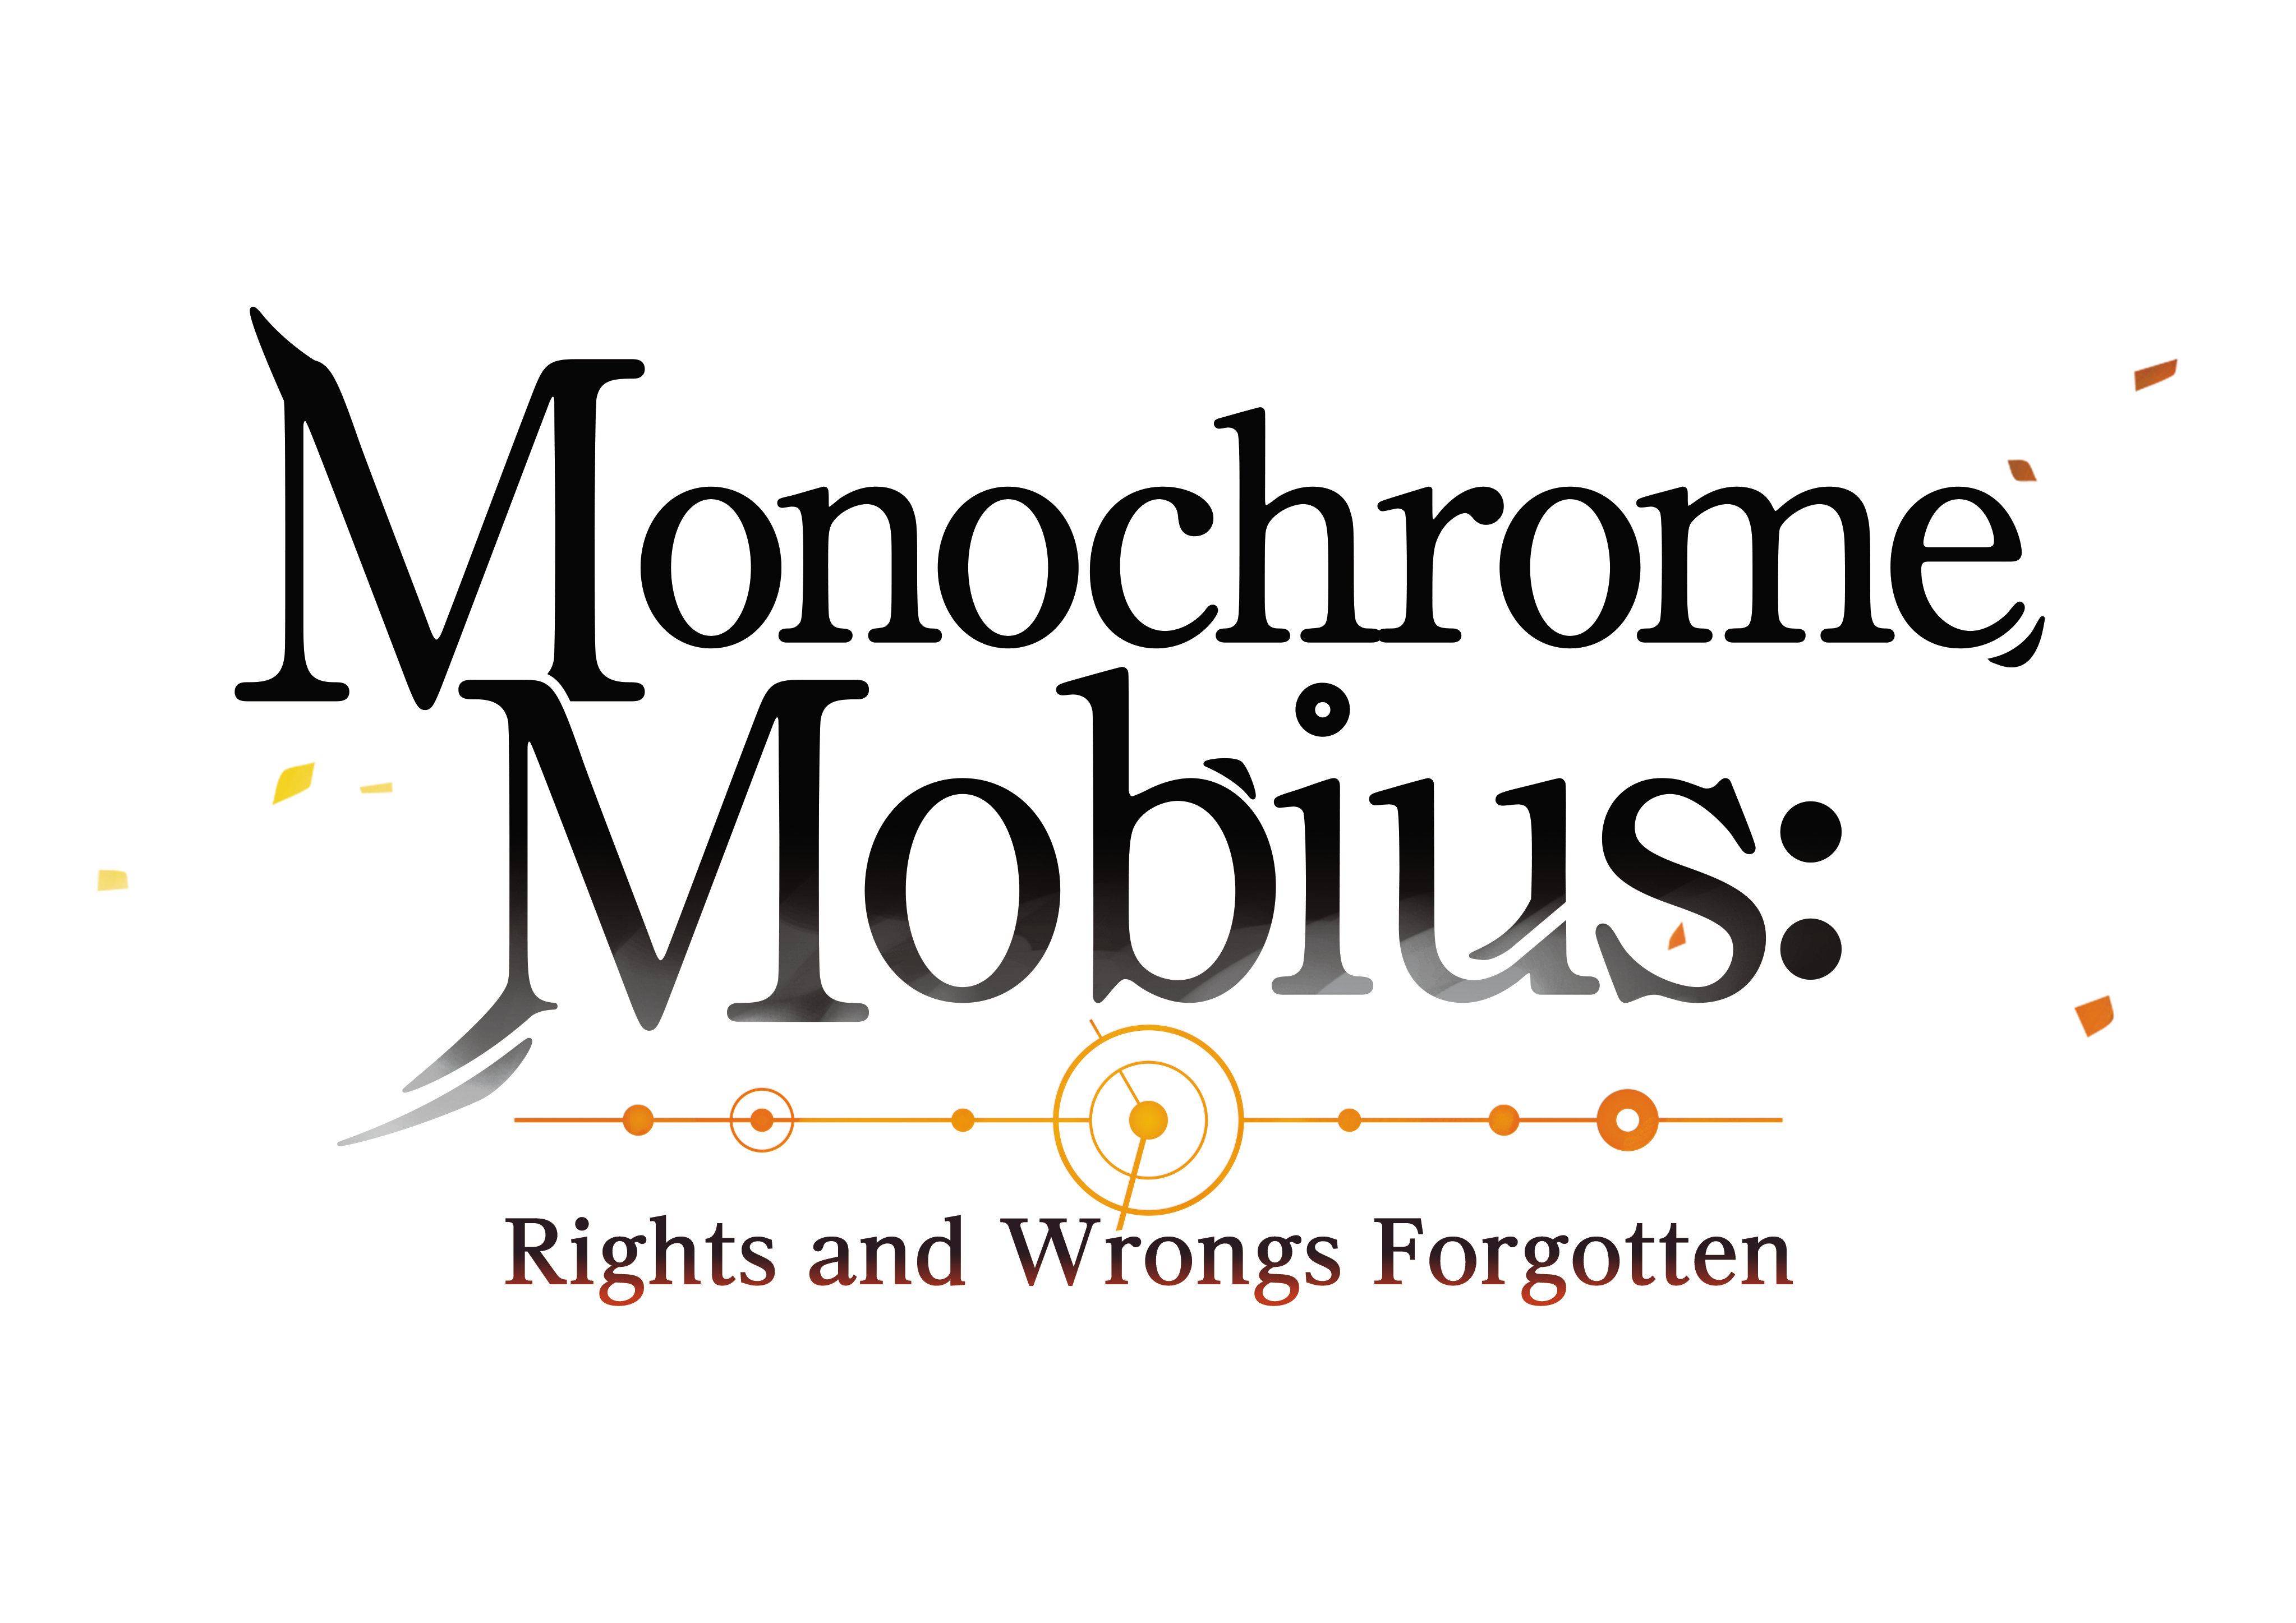 Monochrome Mobius: Rights and Wrongs Forgotten is Available Now!